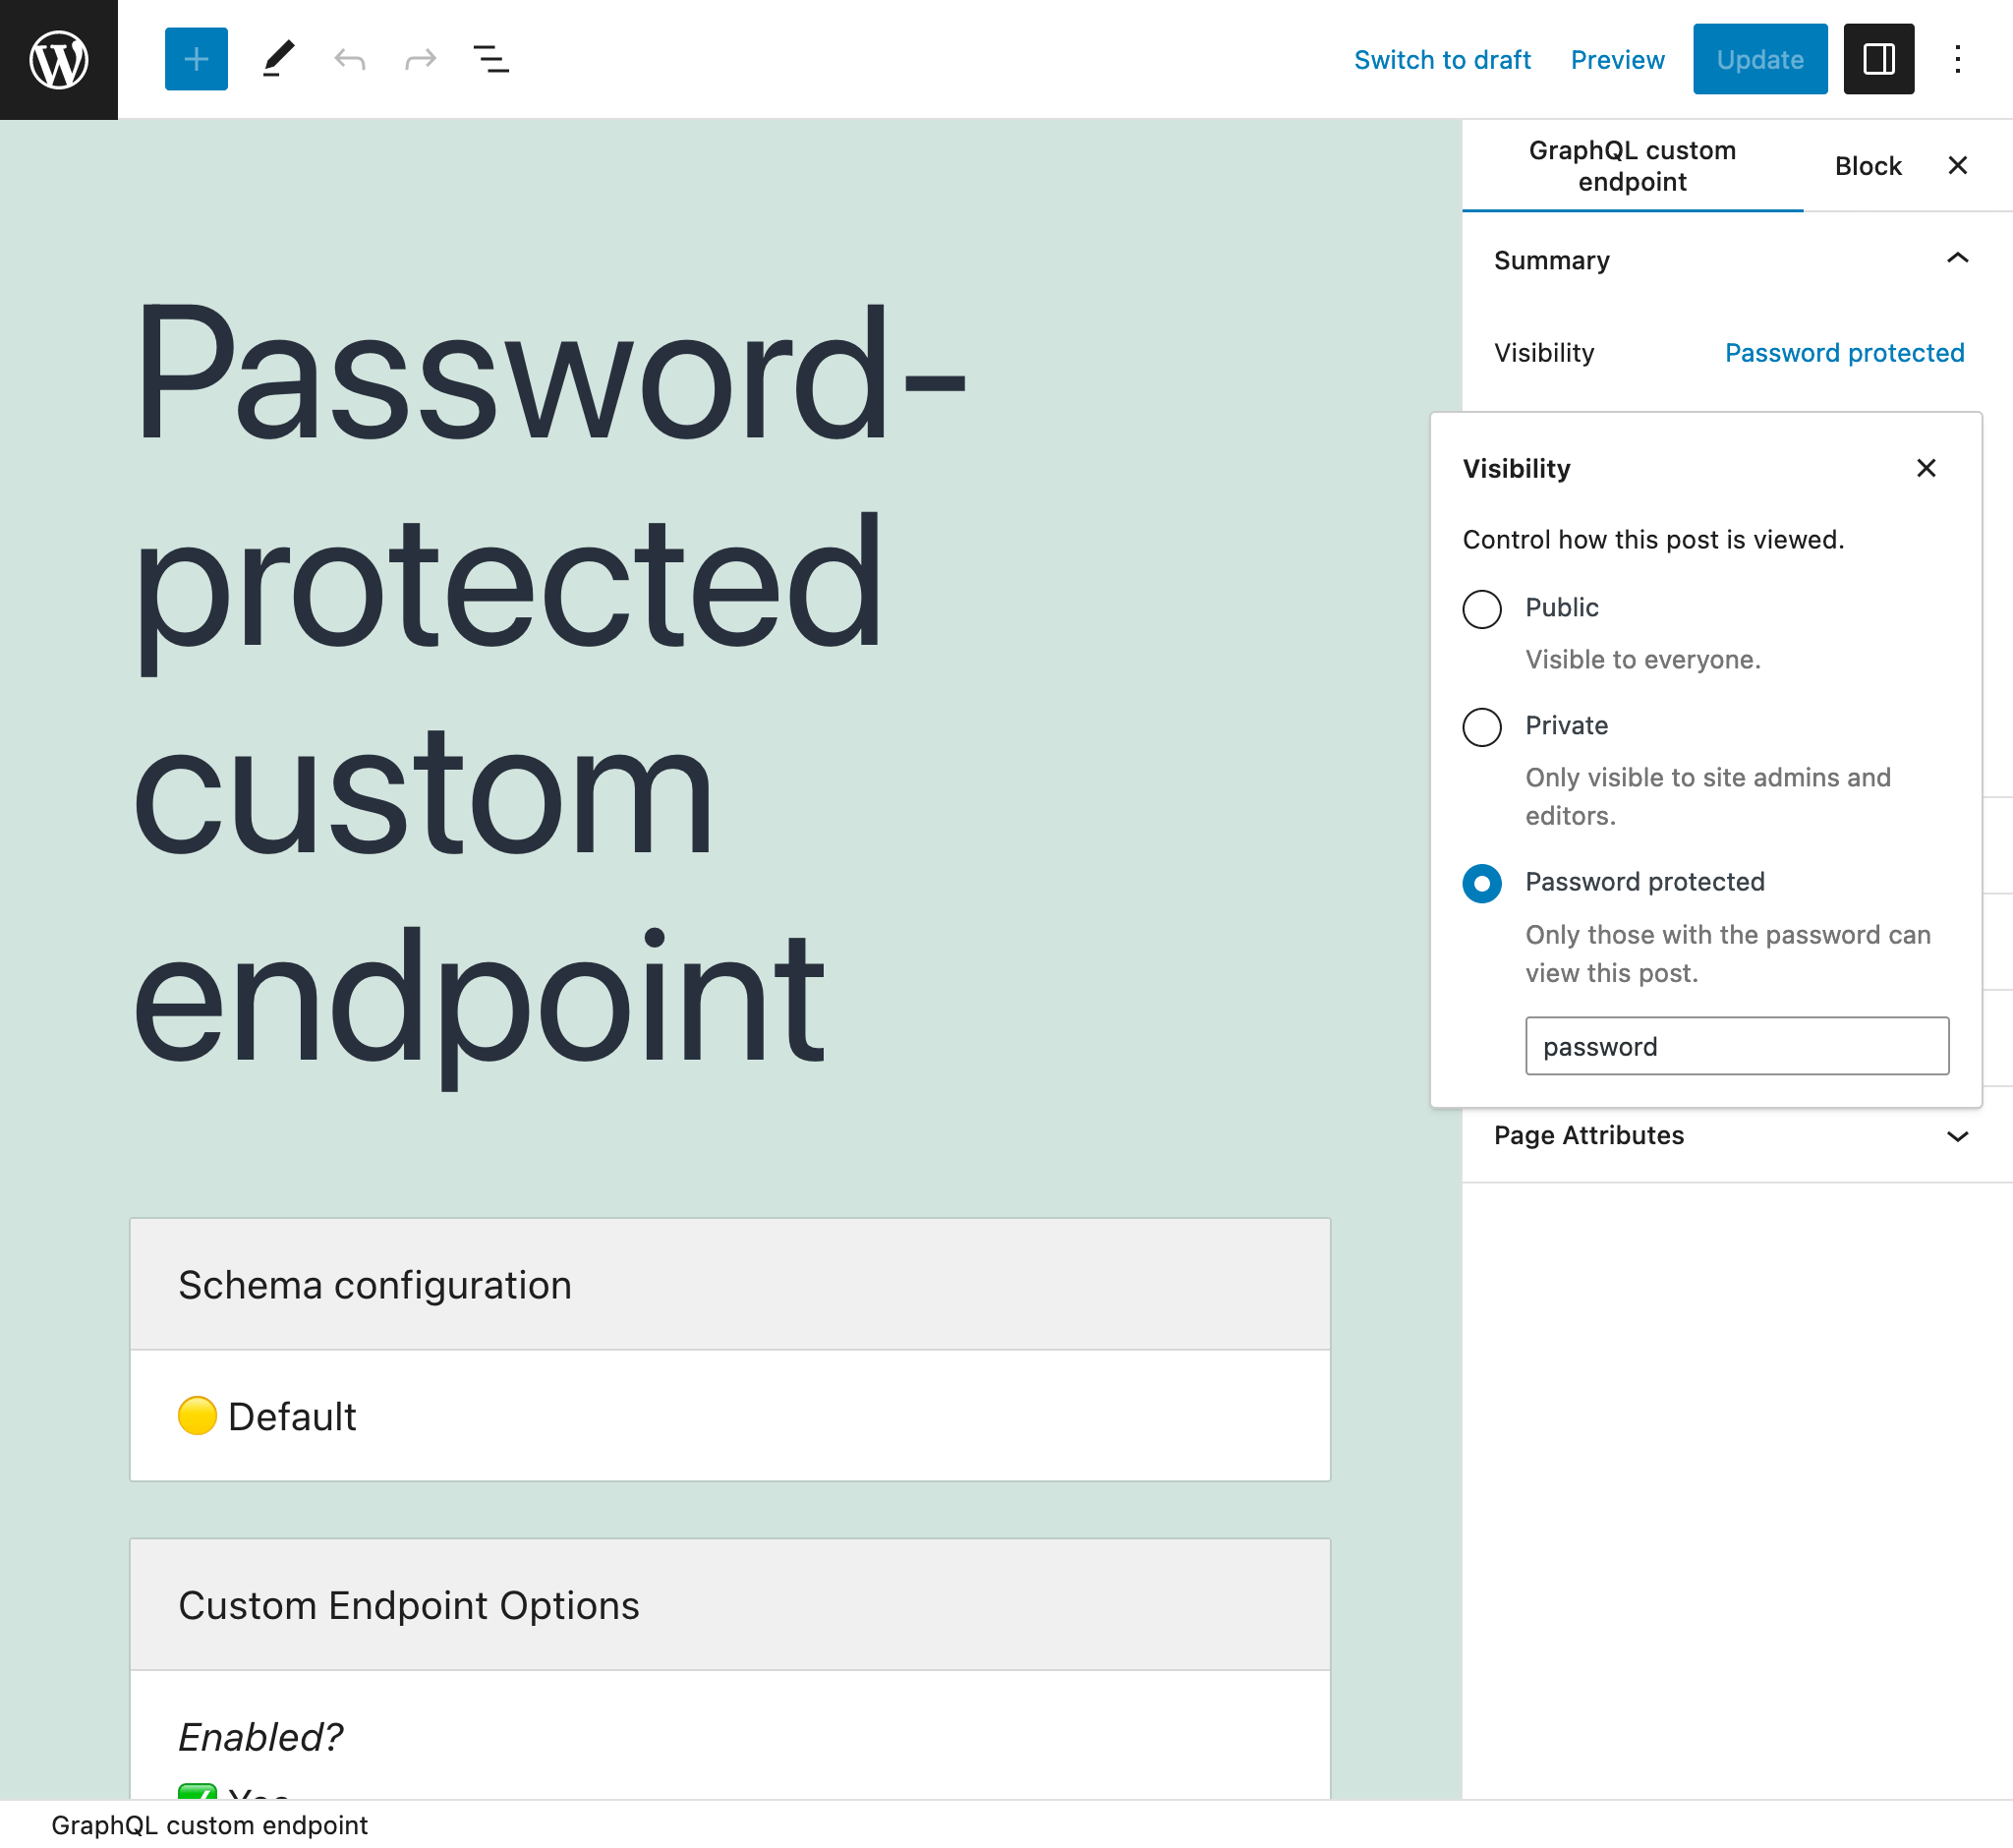 Custom endpoints and Persisted queries can be public, private and password-protected